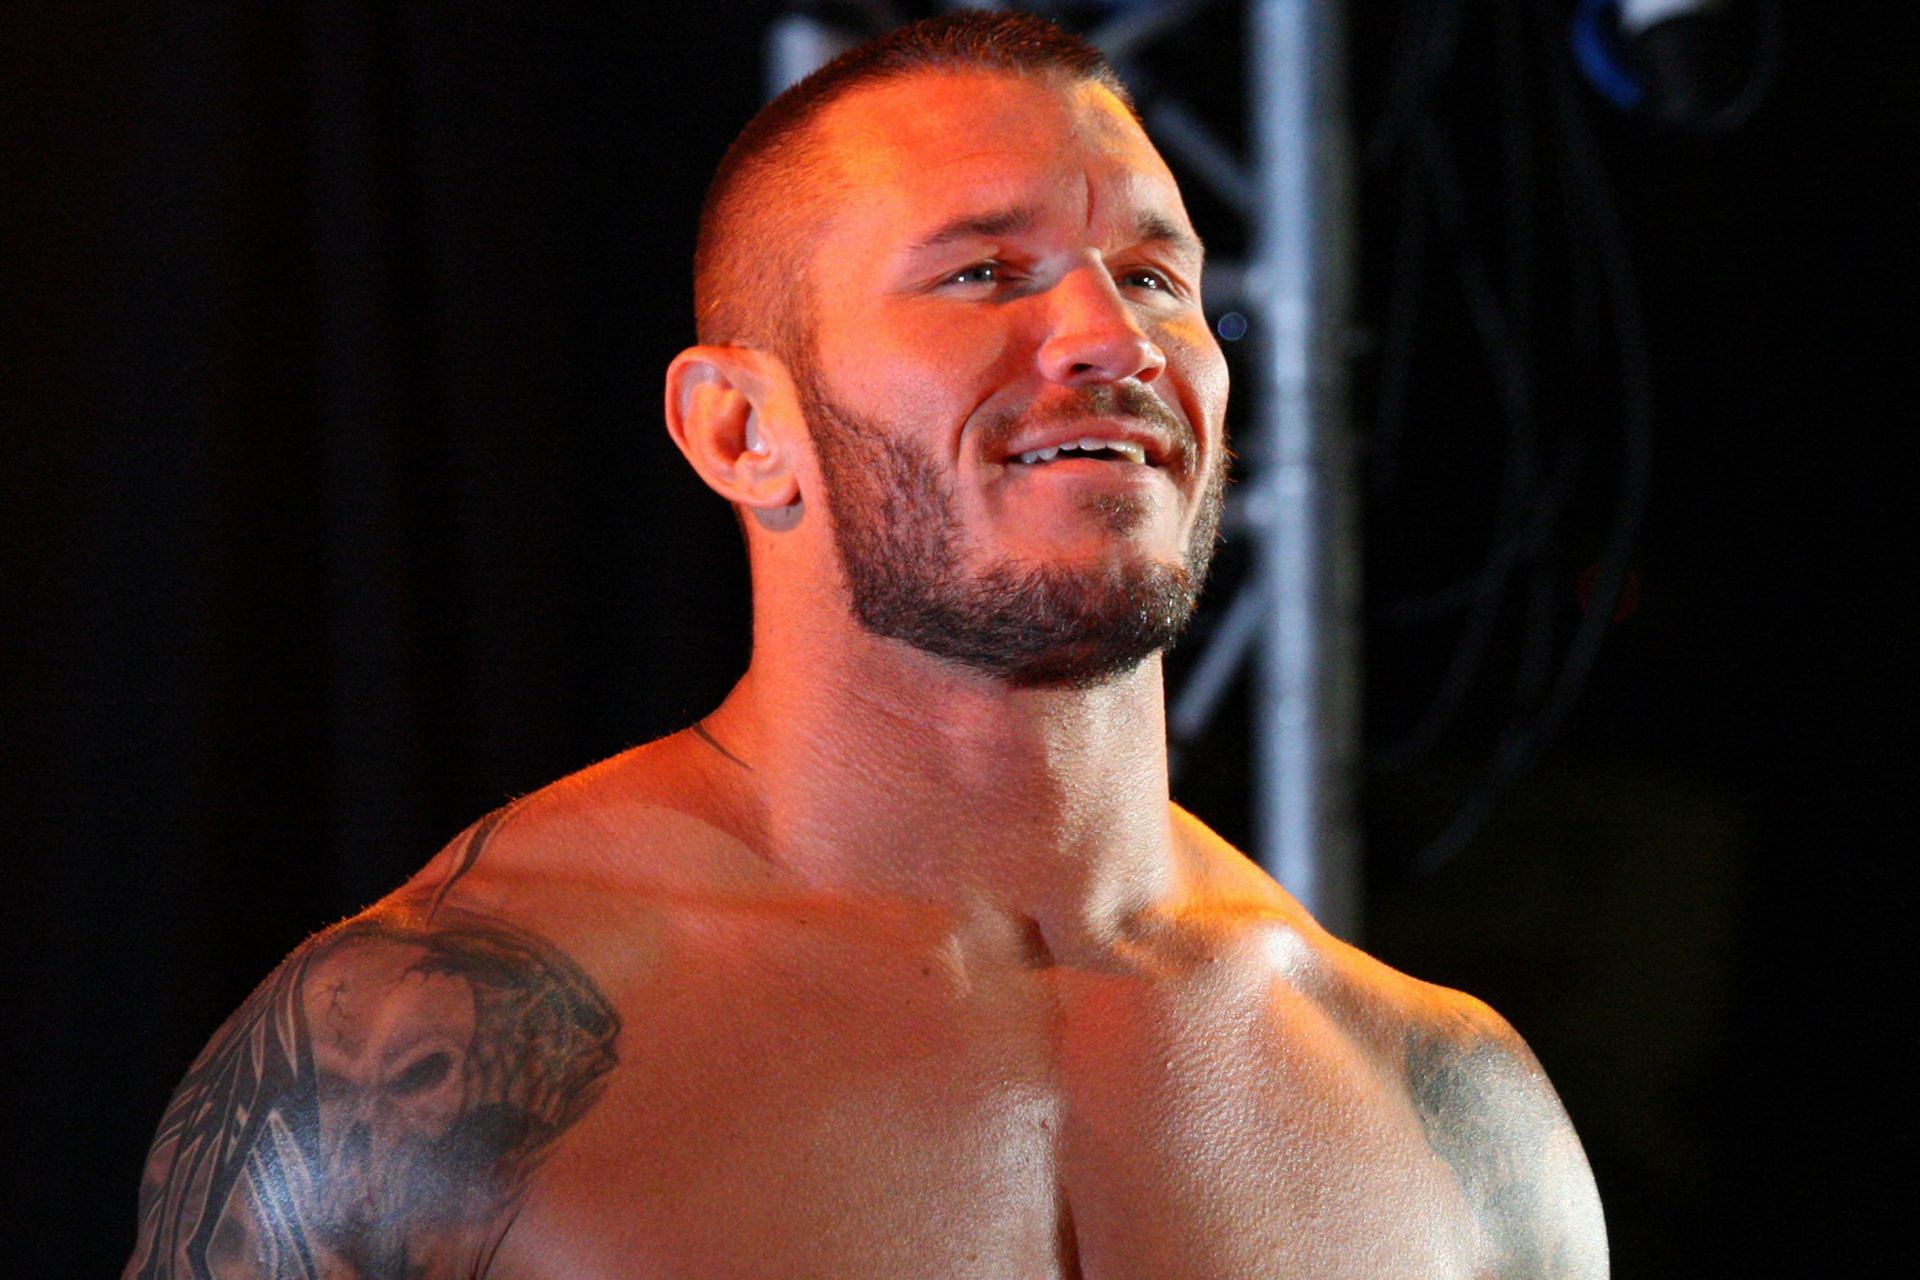 When will The Viper call it a career?